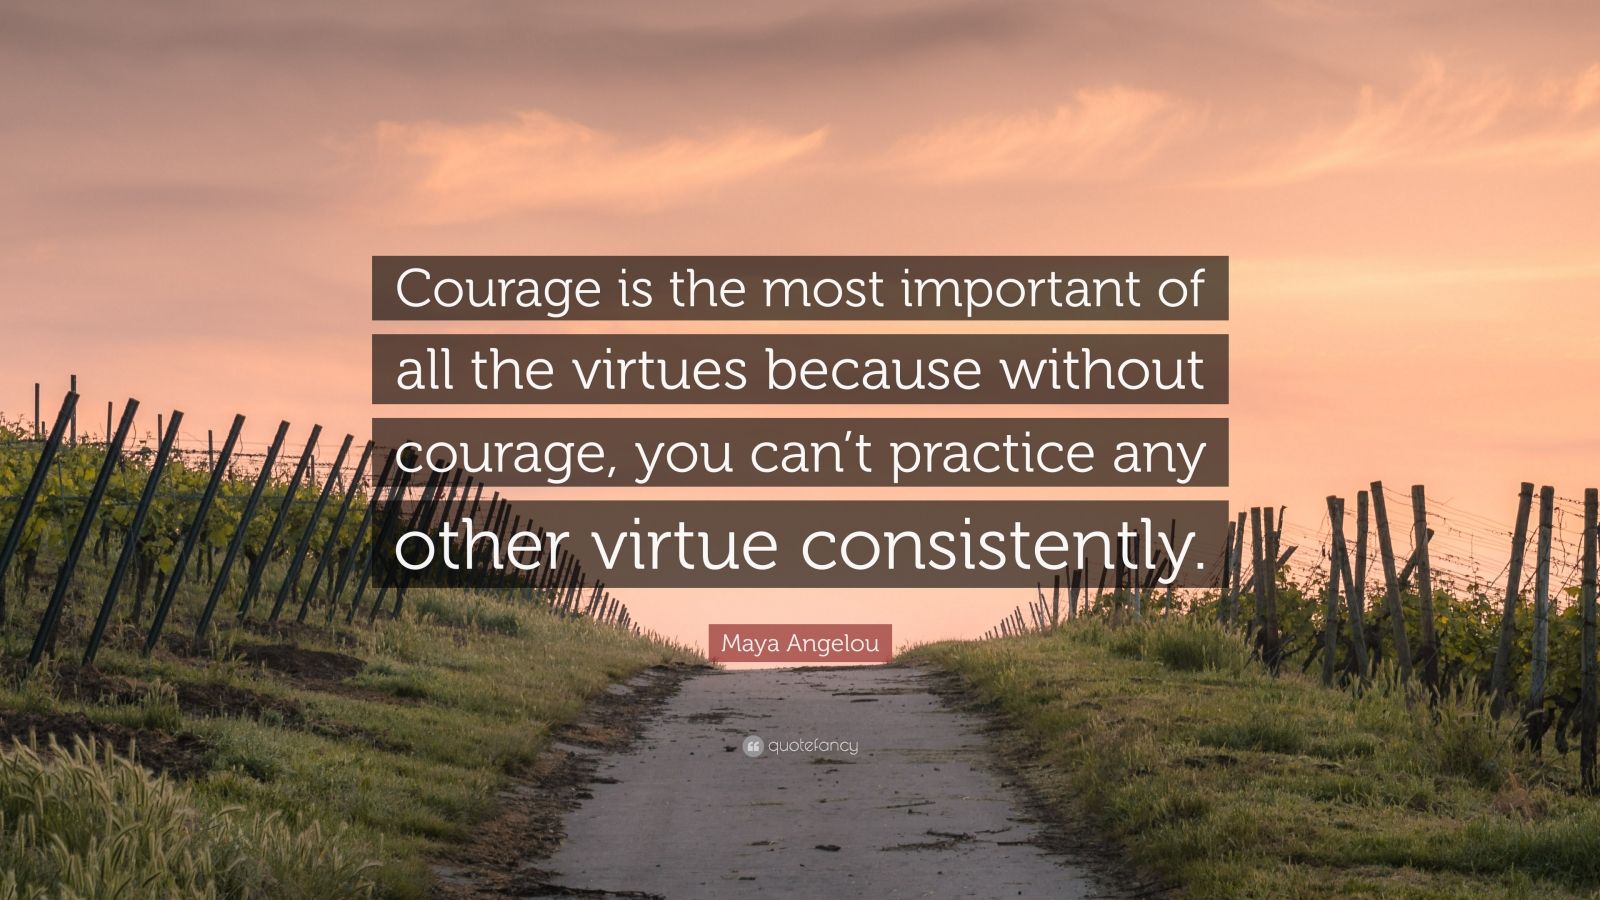 Maya Angelou Quote: “Courage is the most important of all the virtues ...